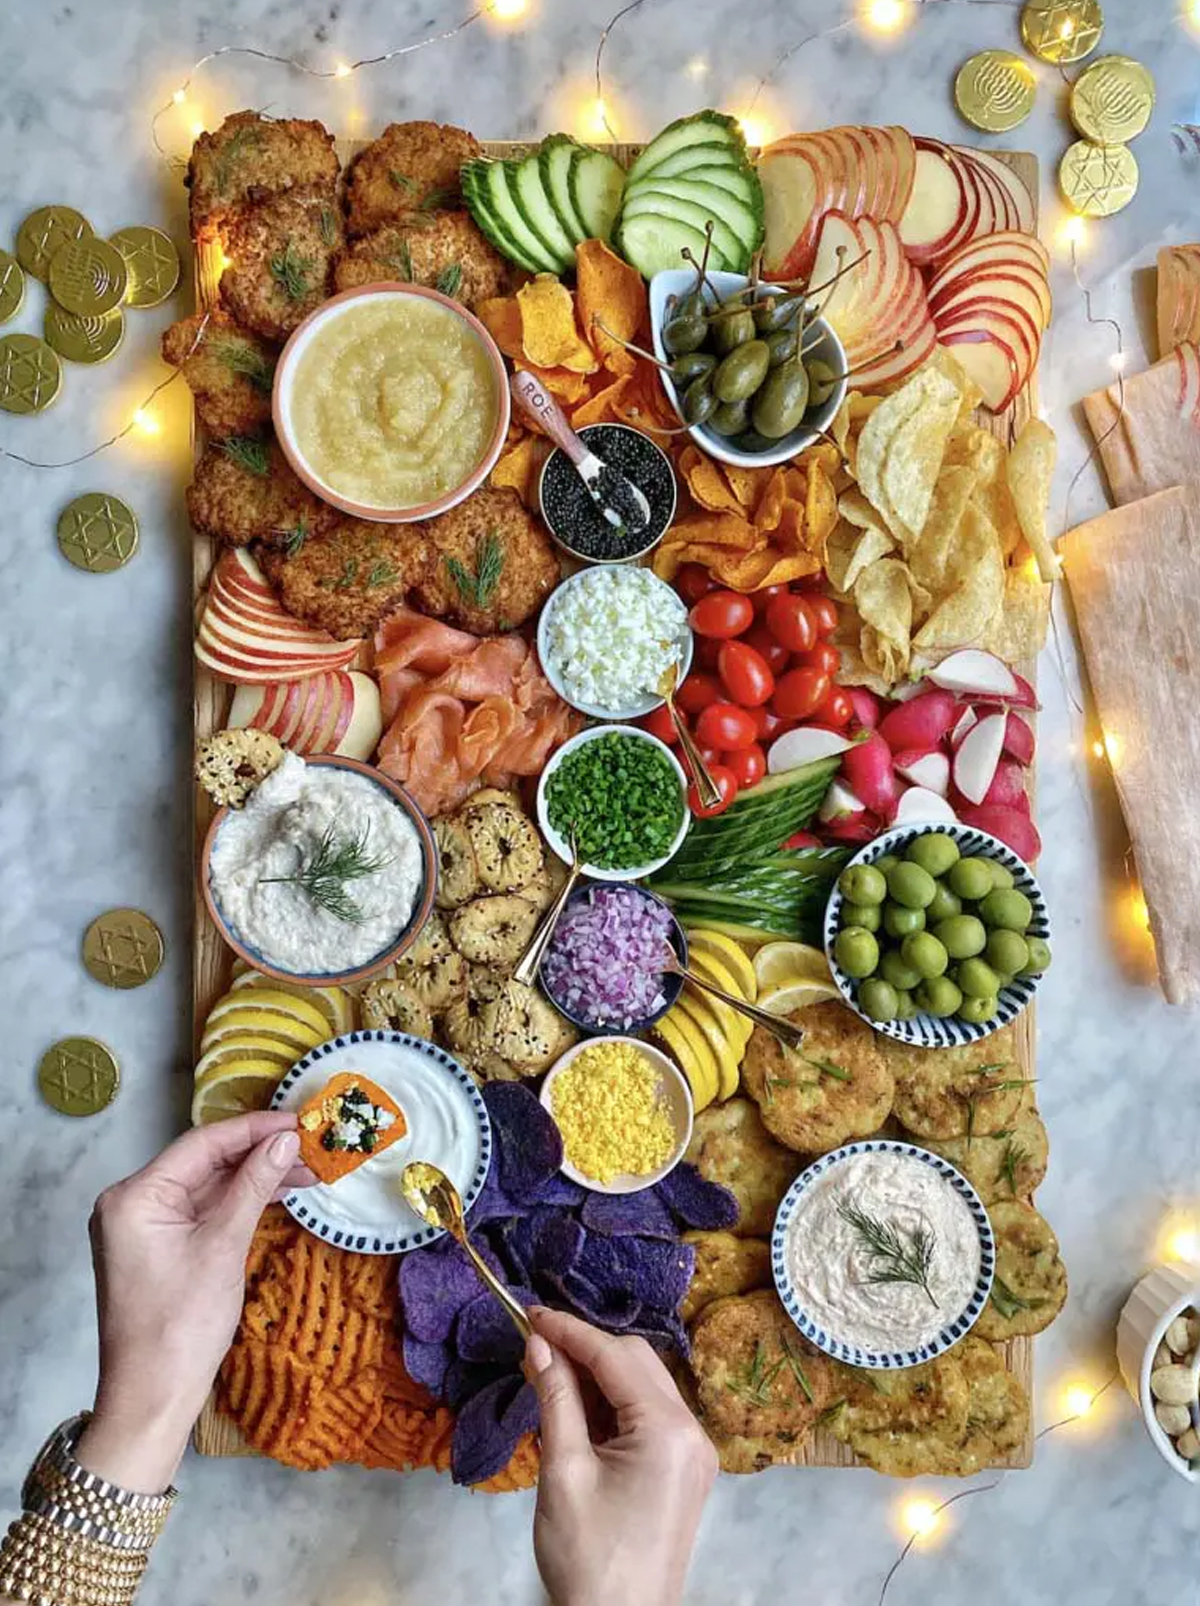 veggies, charcuterie meet, sweet potato fries and chips, along with apple slices, latkes, and dips fill ain't too proud to meg's Hanukkah charcuterie board recipe.